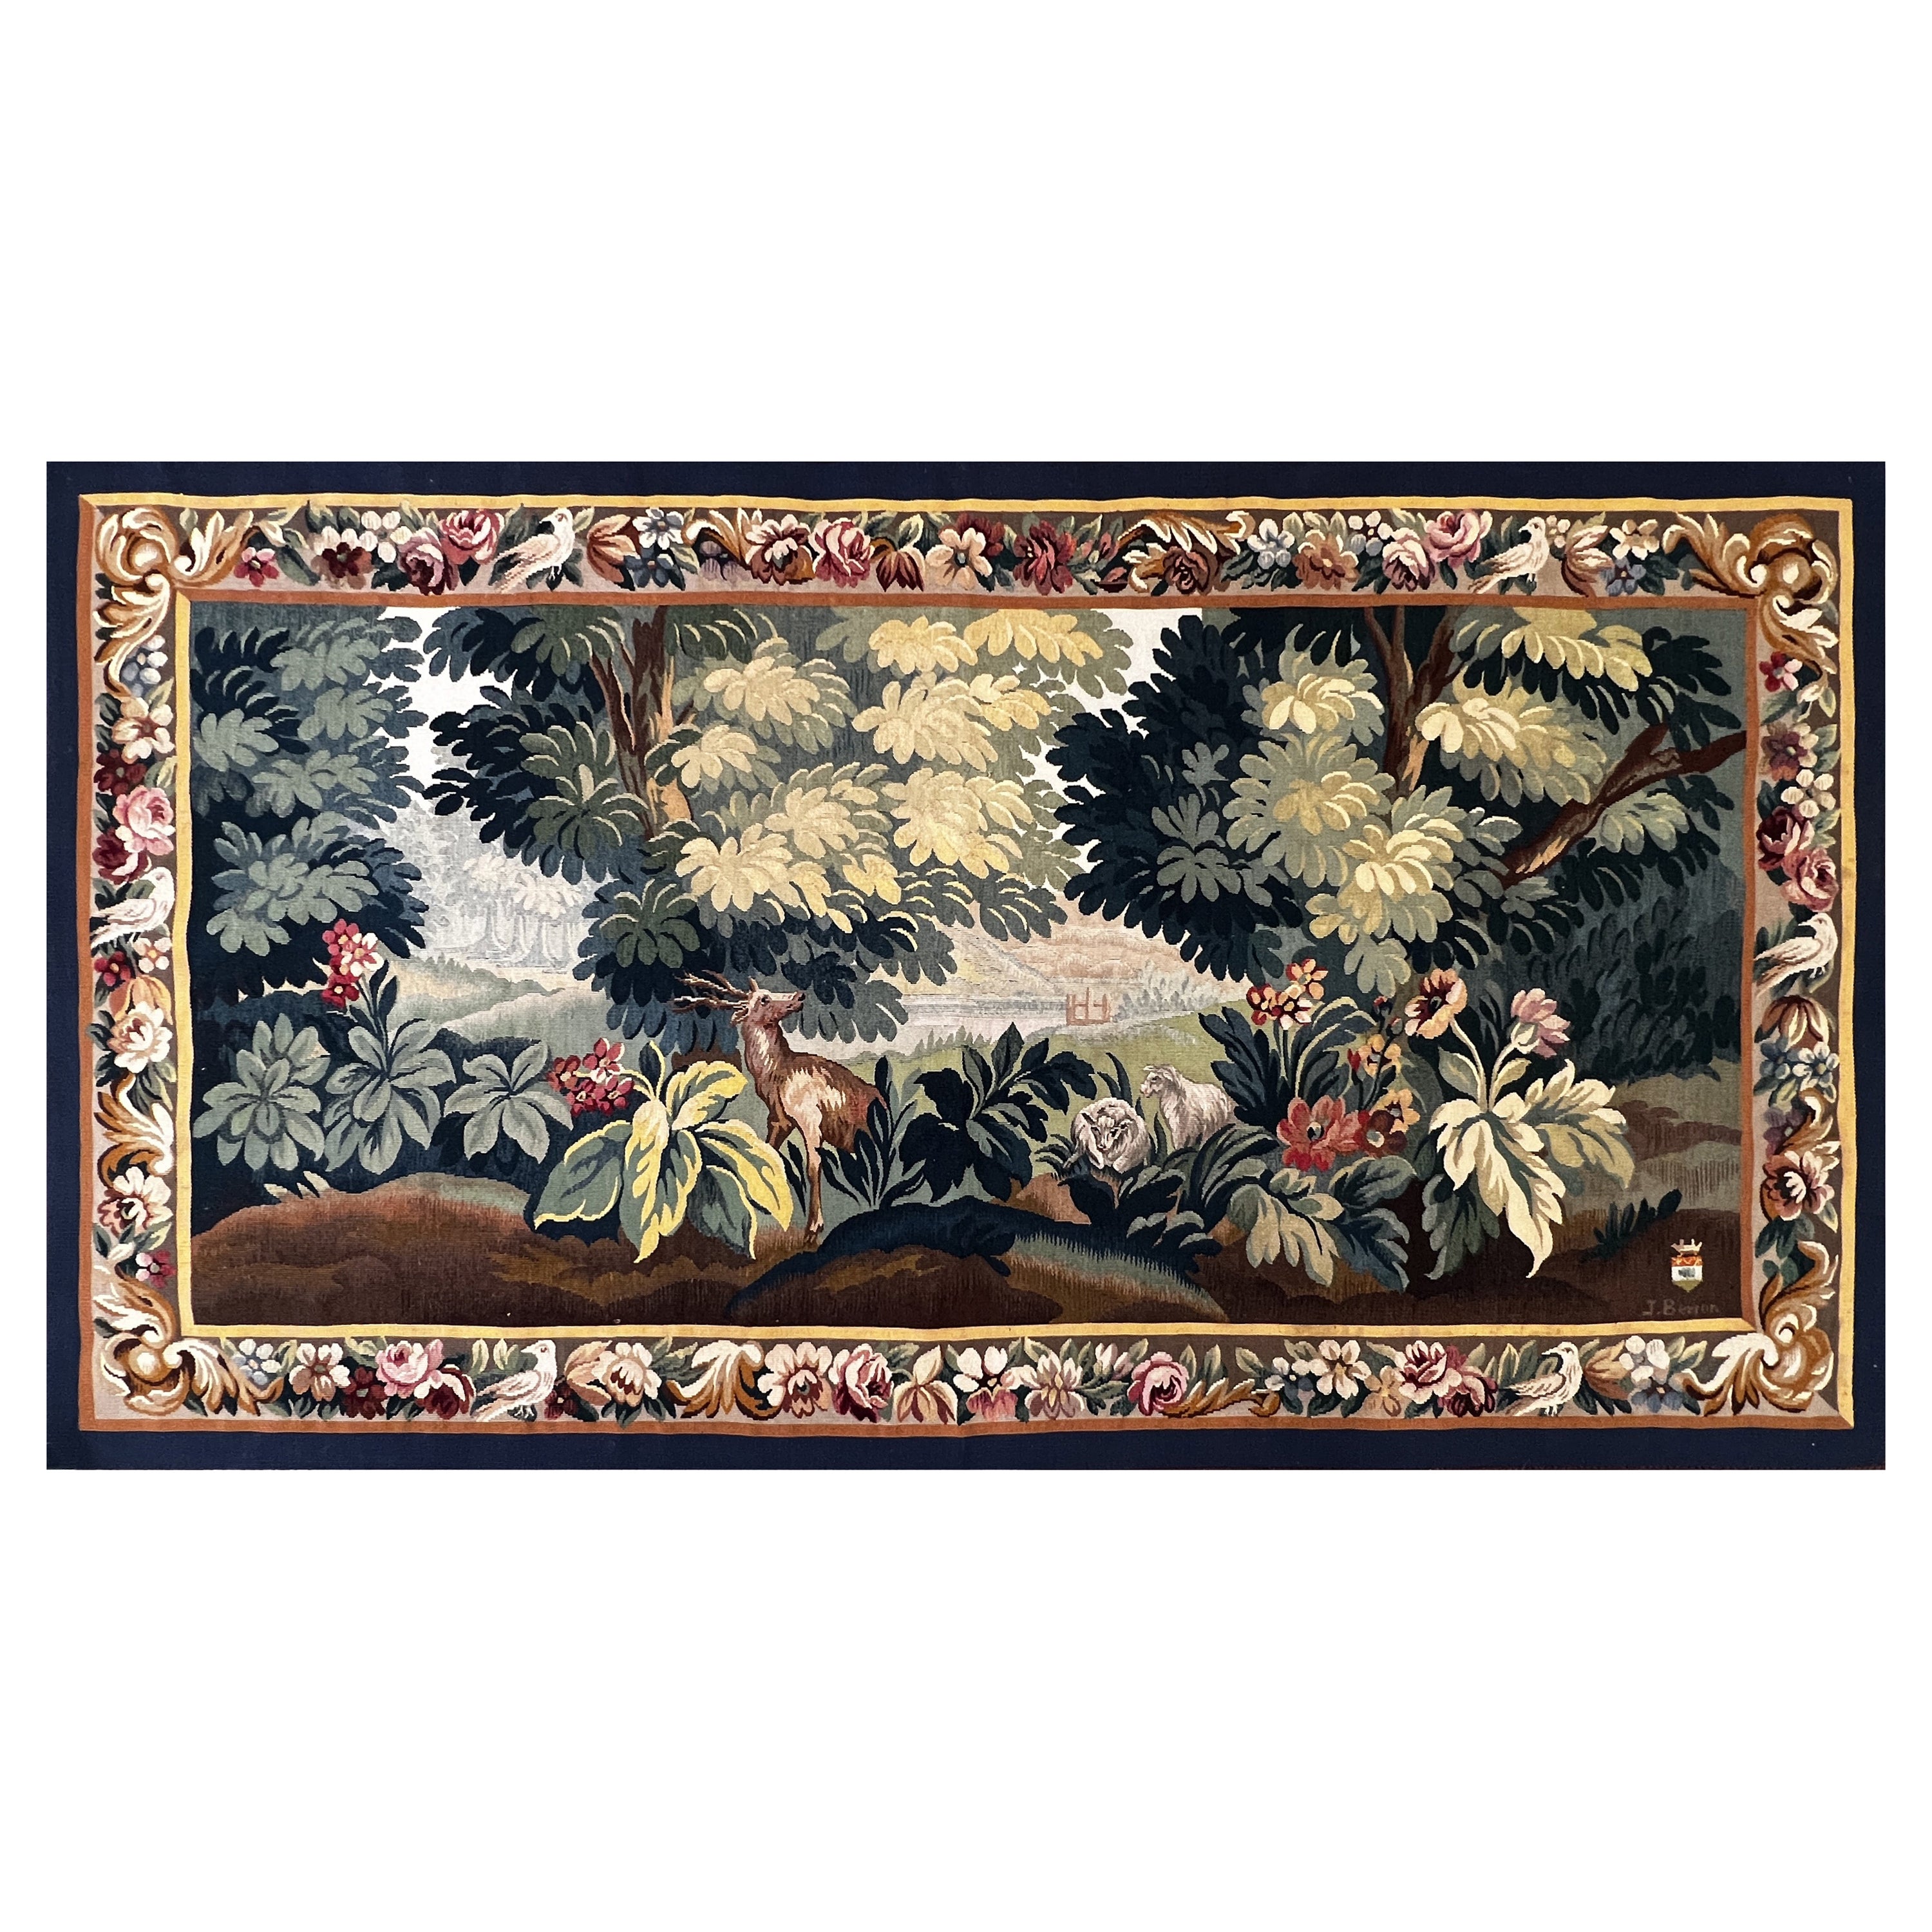 19th century Aubusson tapestry - N° 966